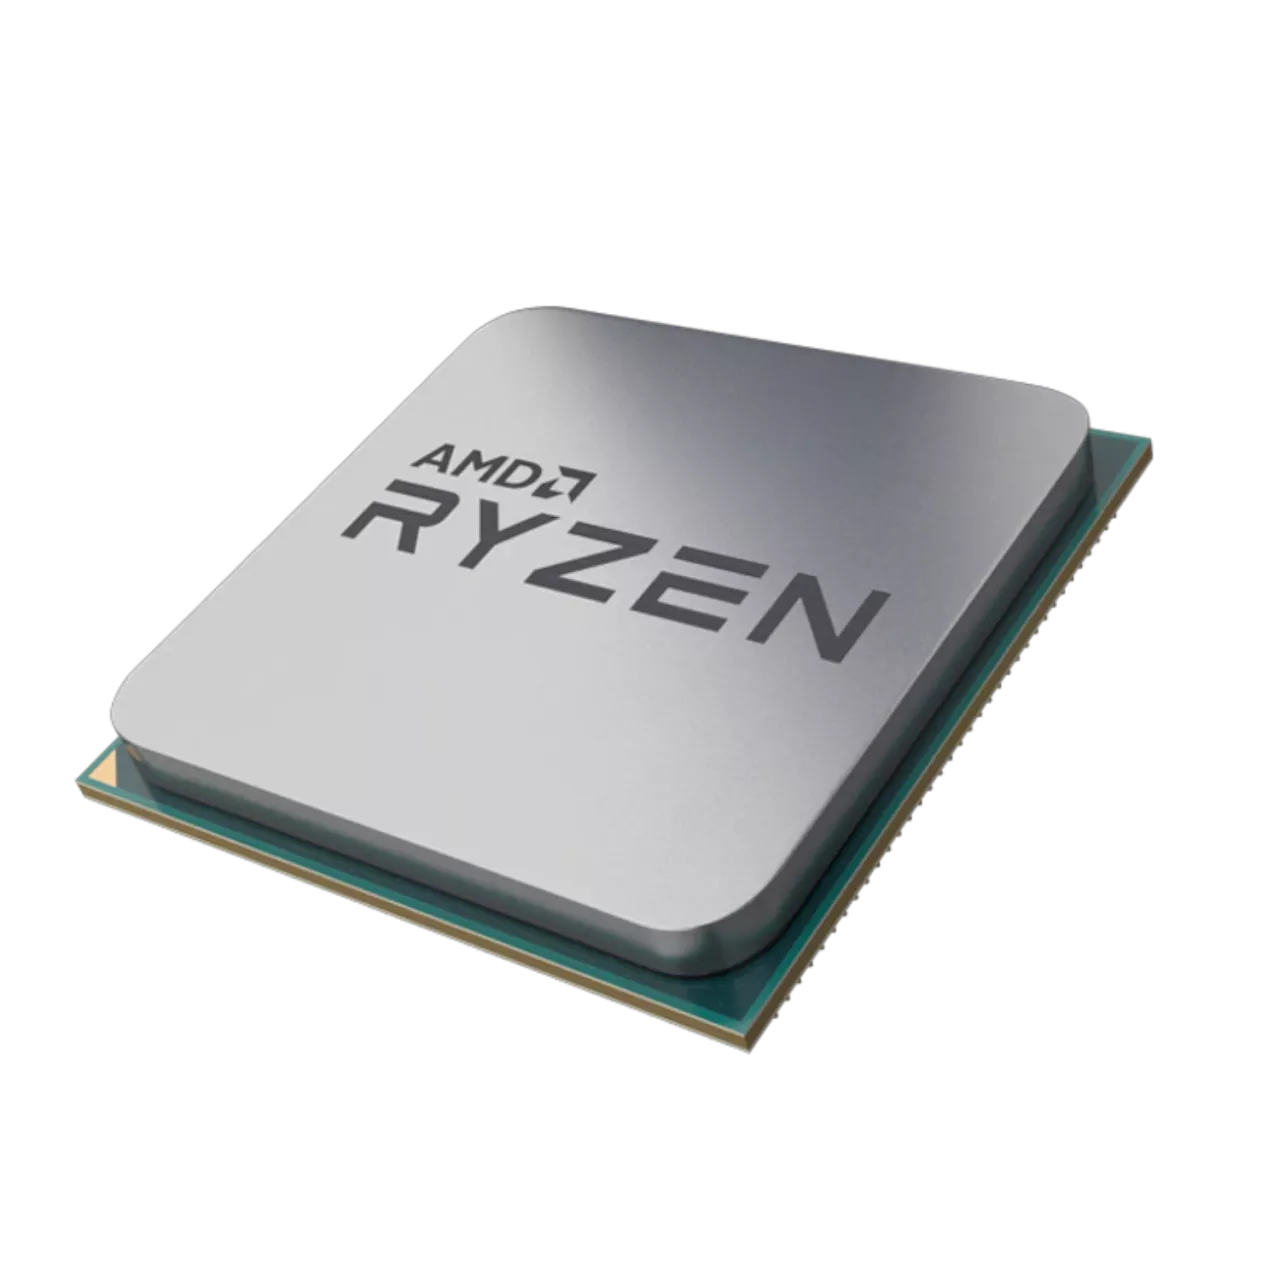 AMD A4-4000, 2C/2T, 3.00-3.20GHz, boxed